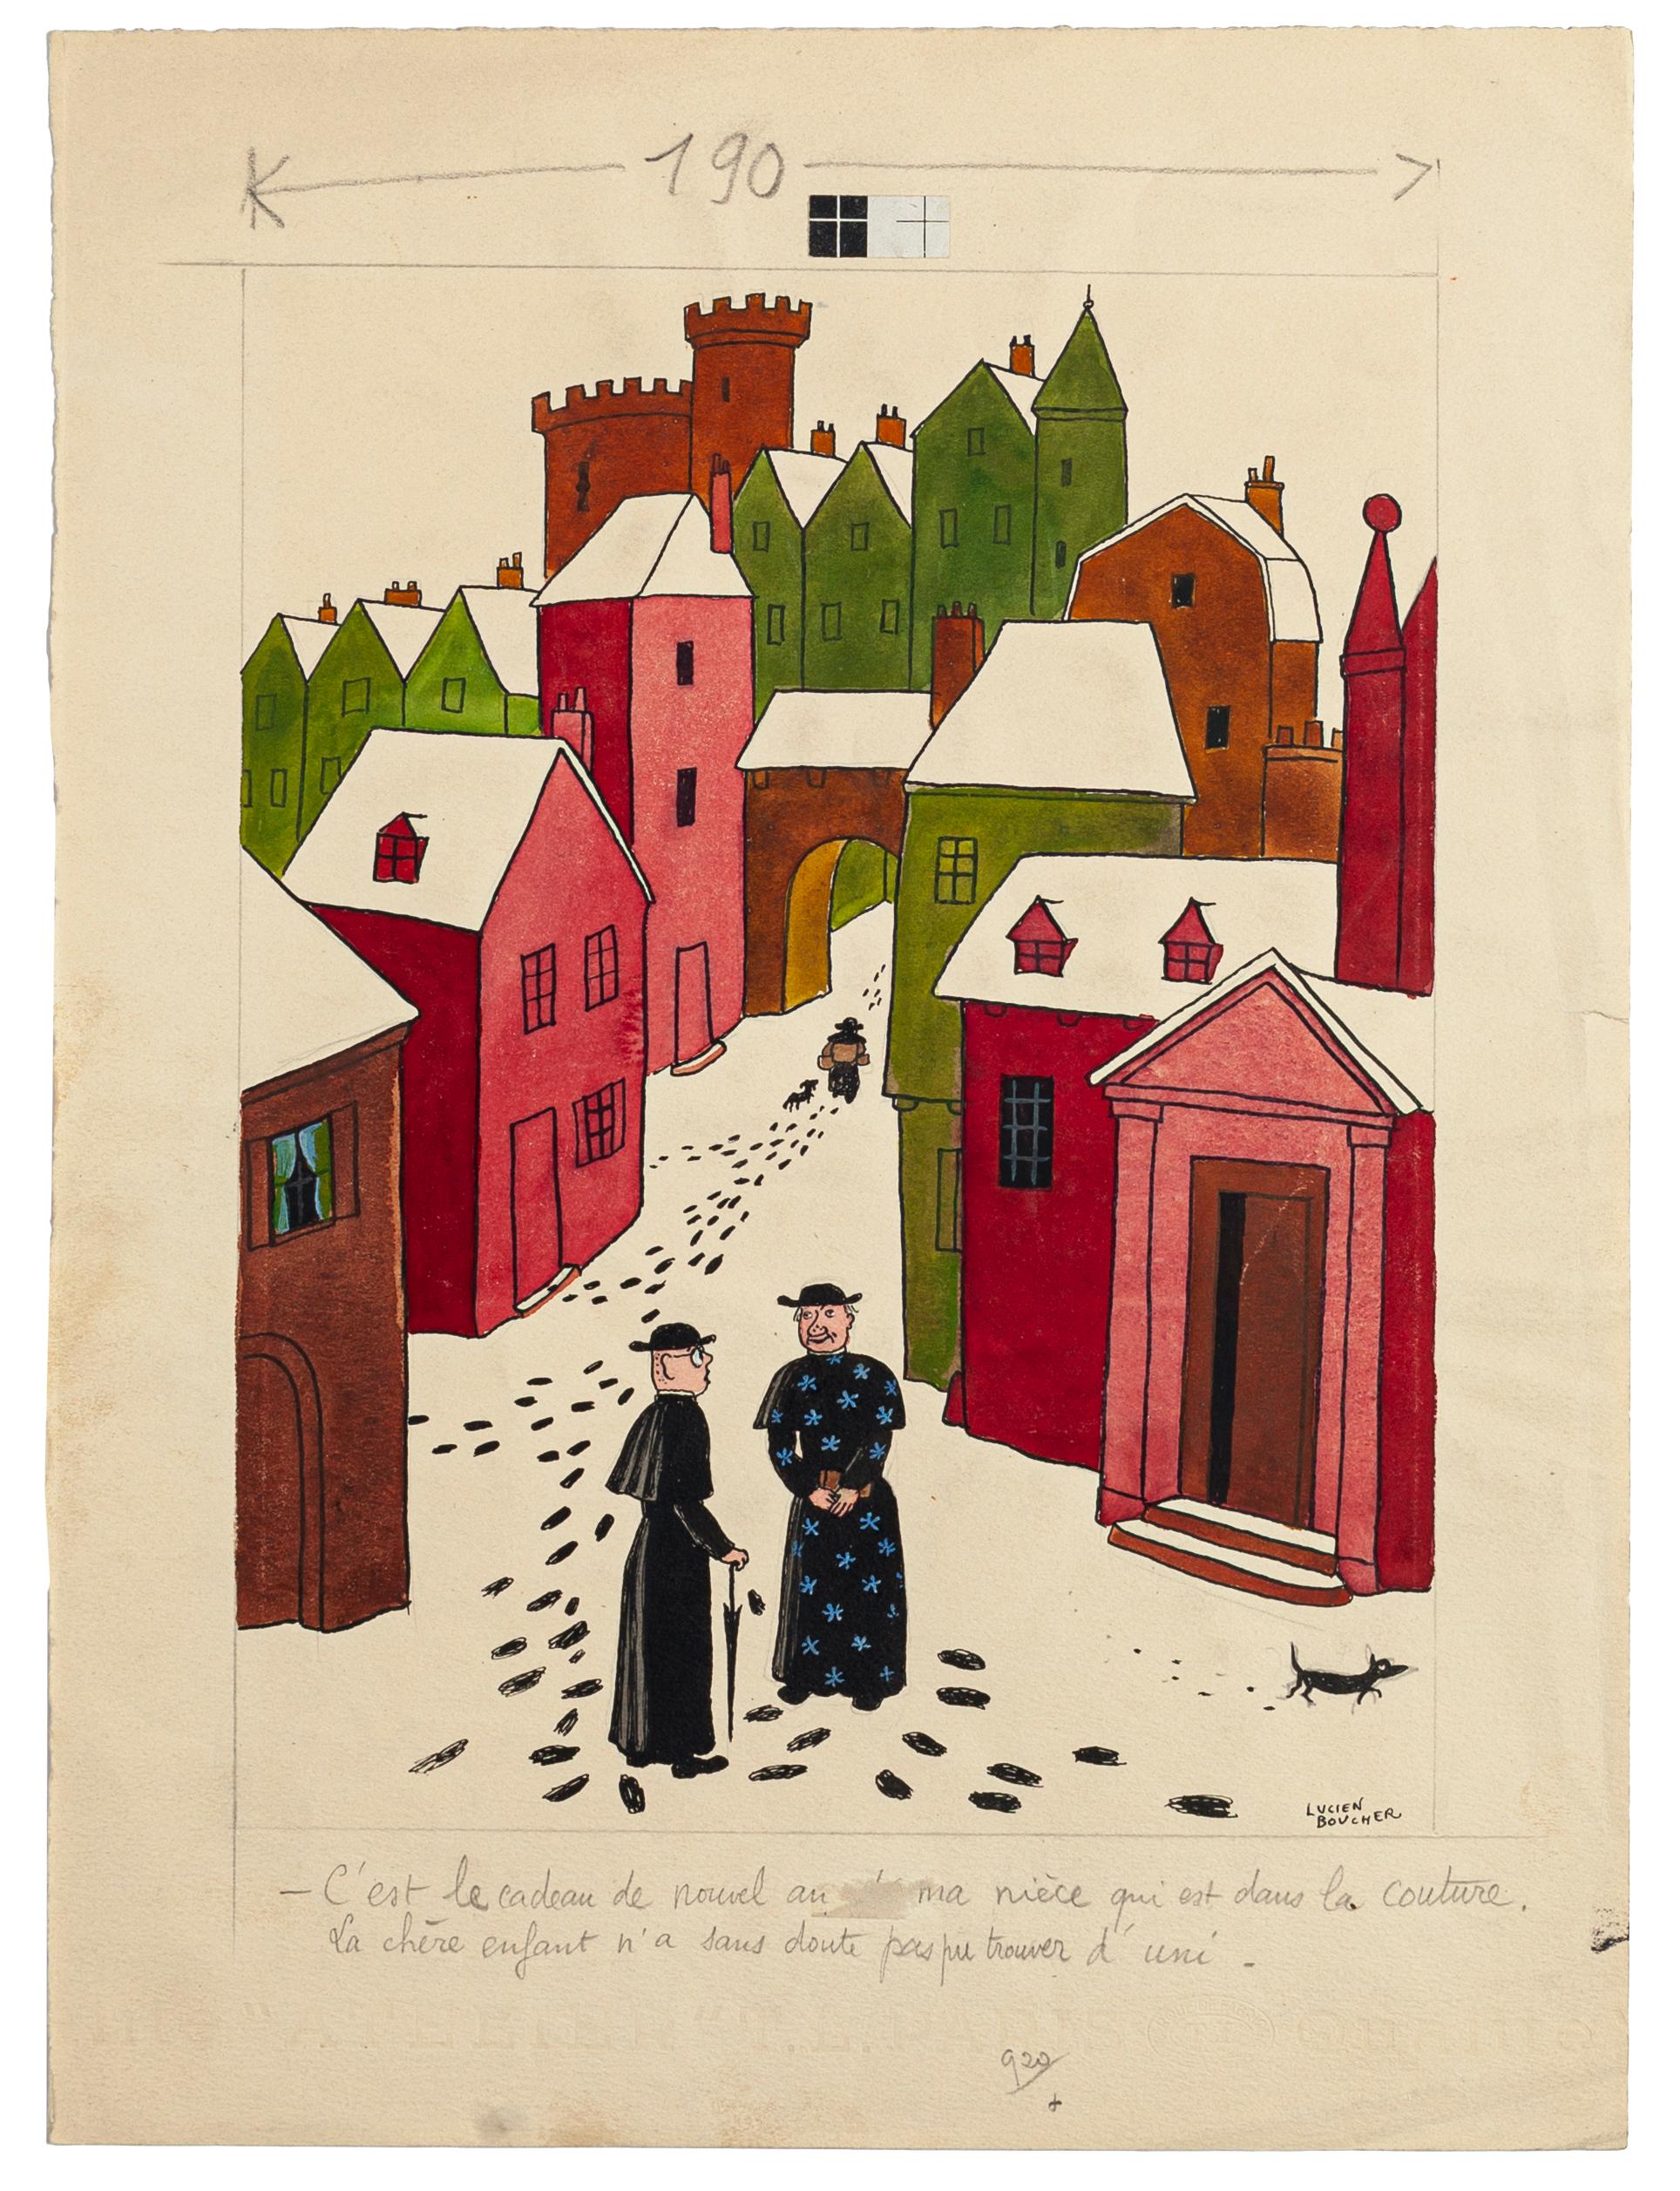 Village is an original drawing in pencil, pen and tempera, illustration, realized by Lucien Boucher (1889-1971), hand-signed on the lower right. The state of preservation of the artwork is very good, with an inscription on the lower center.

Sheet